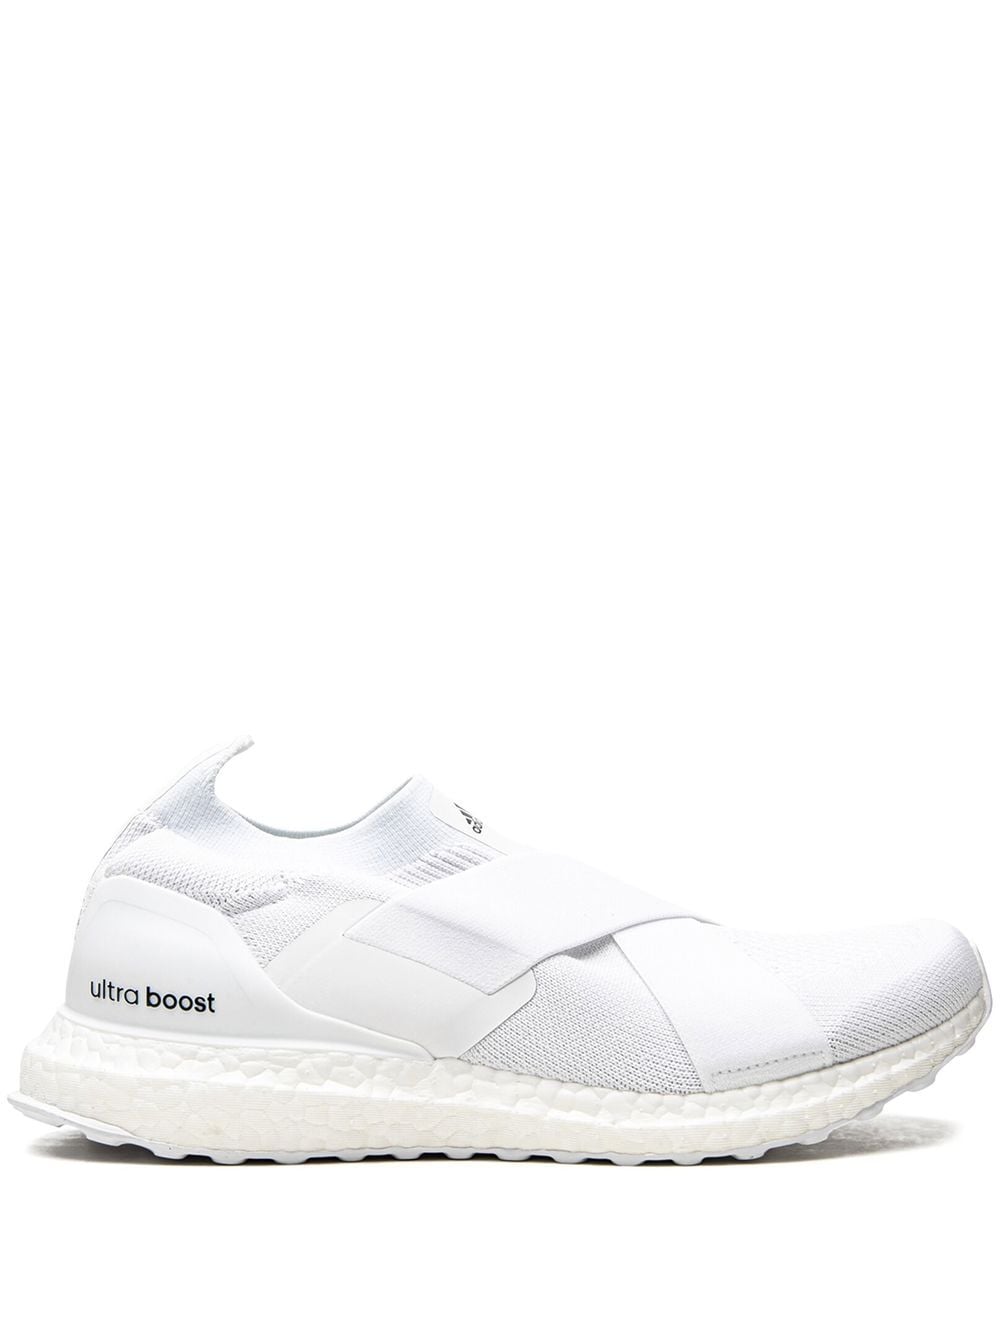 Shop Adidas Originals Ultraboost Slip On Dna Sneakers In White